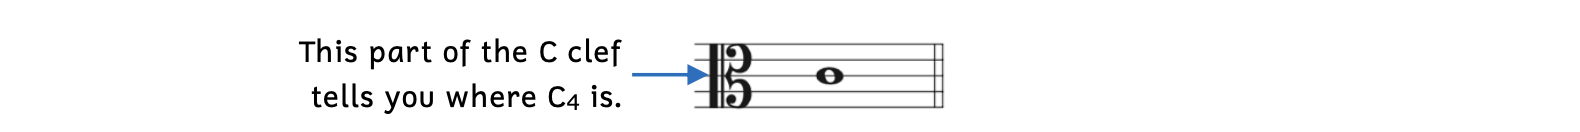 Reading a moveable C clef. The middle part of the C clef tells you where C4 is.